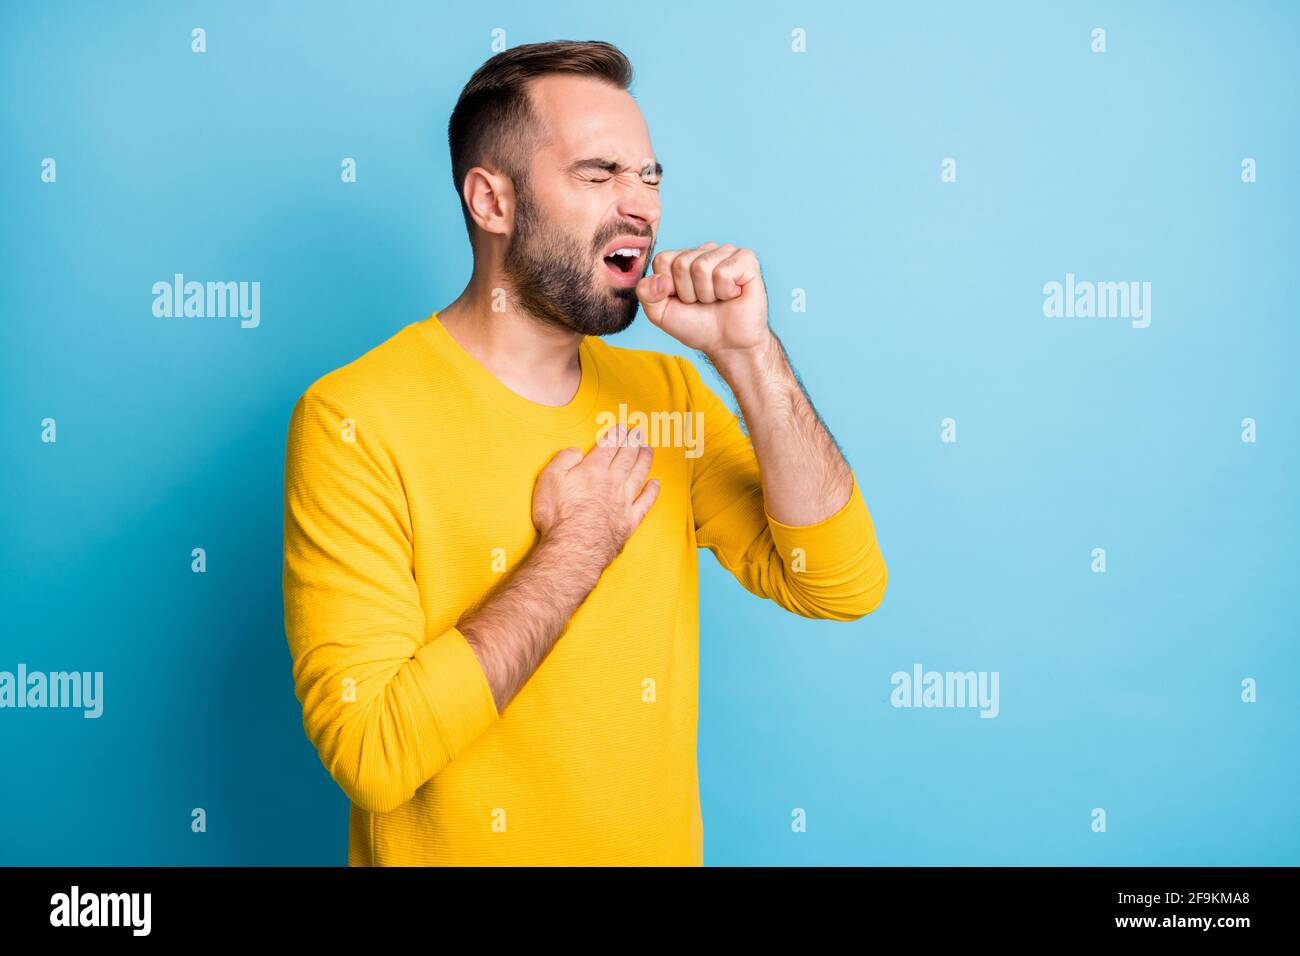 Photo portrait of man having corona virus symptoms cough isolated on bright blue color background Stock Photo